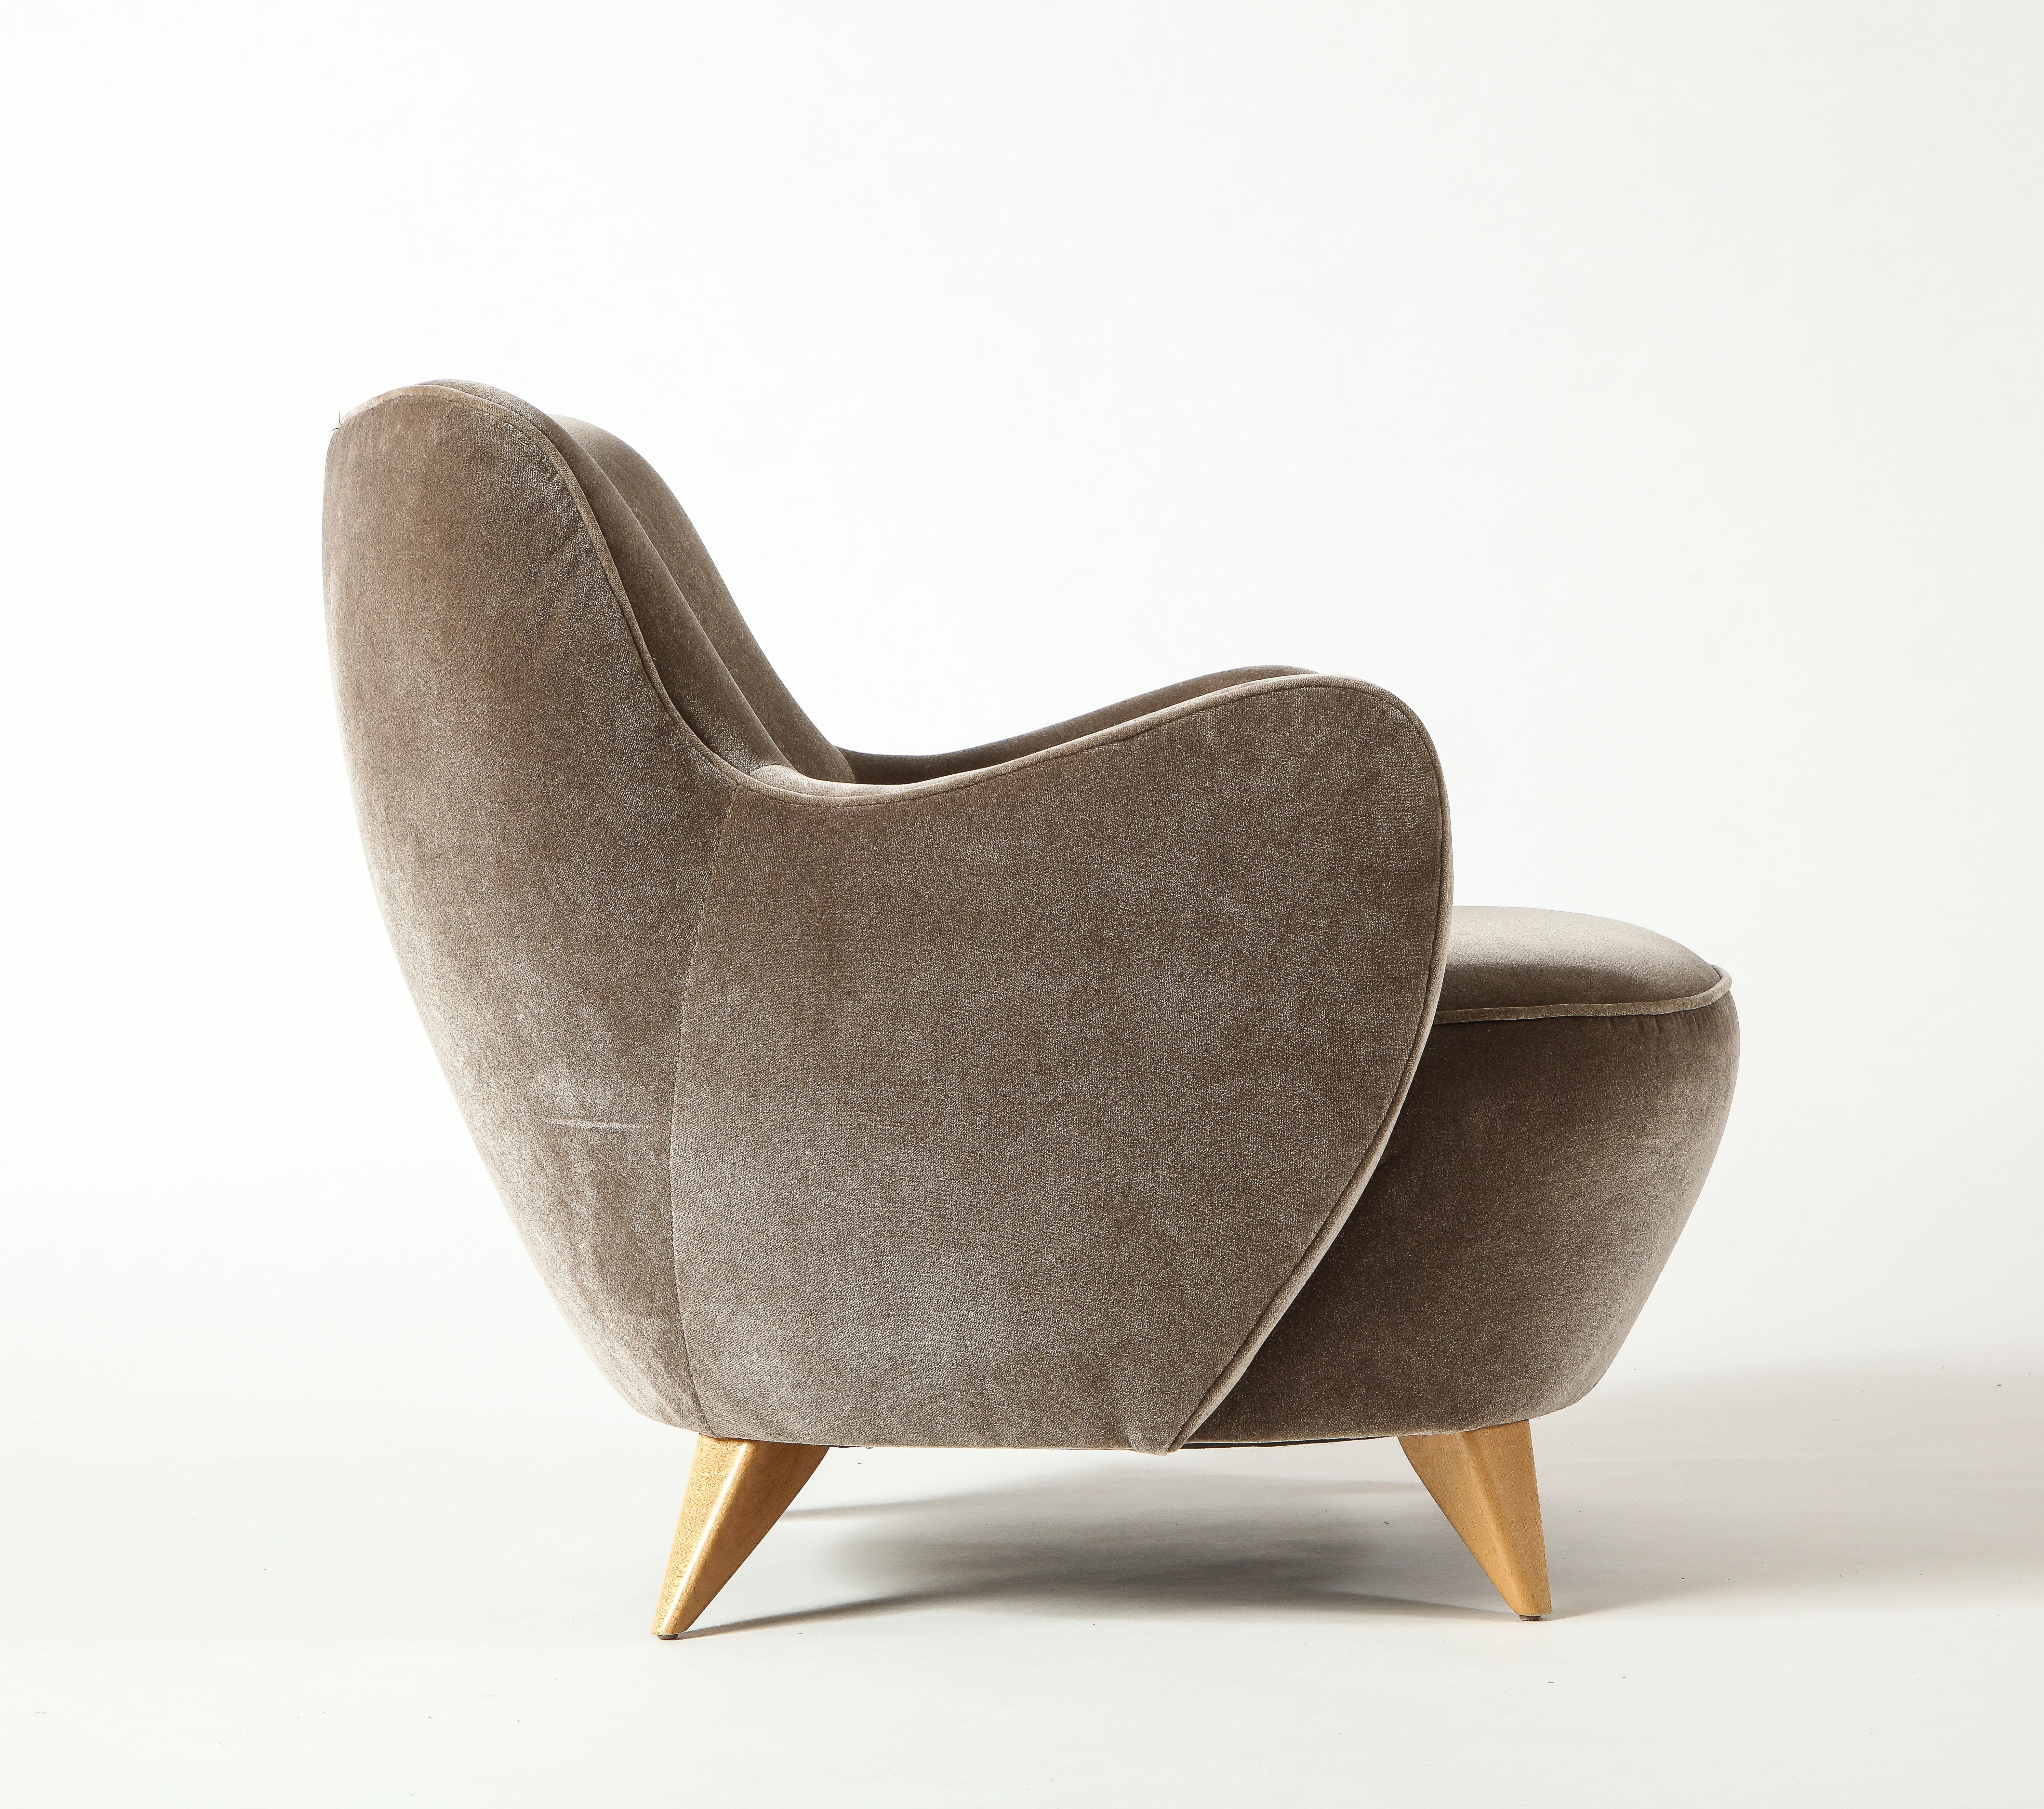 Wood Vladimir Kagan Barrel Chair in Beige Upholstery with Natural Maple Base